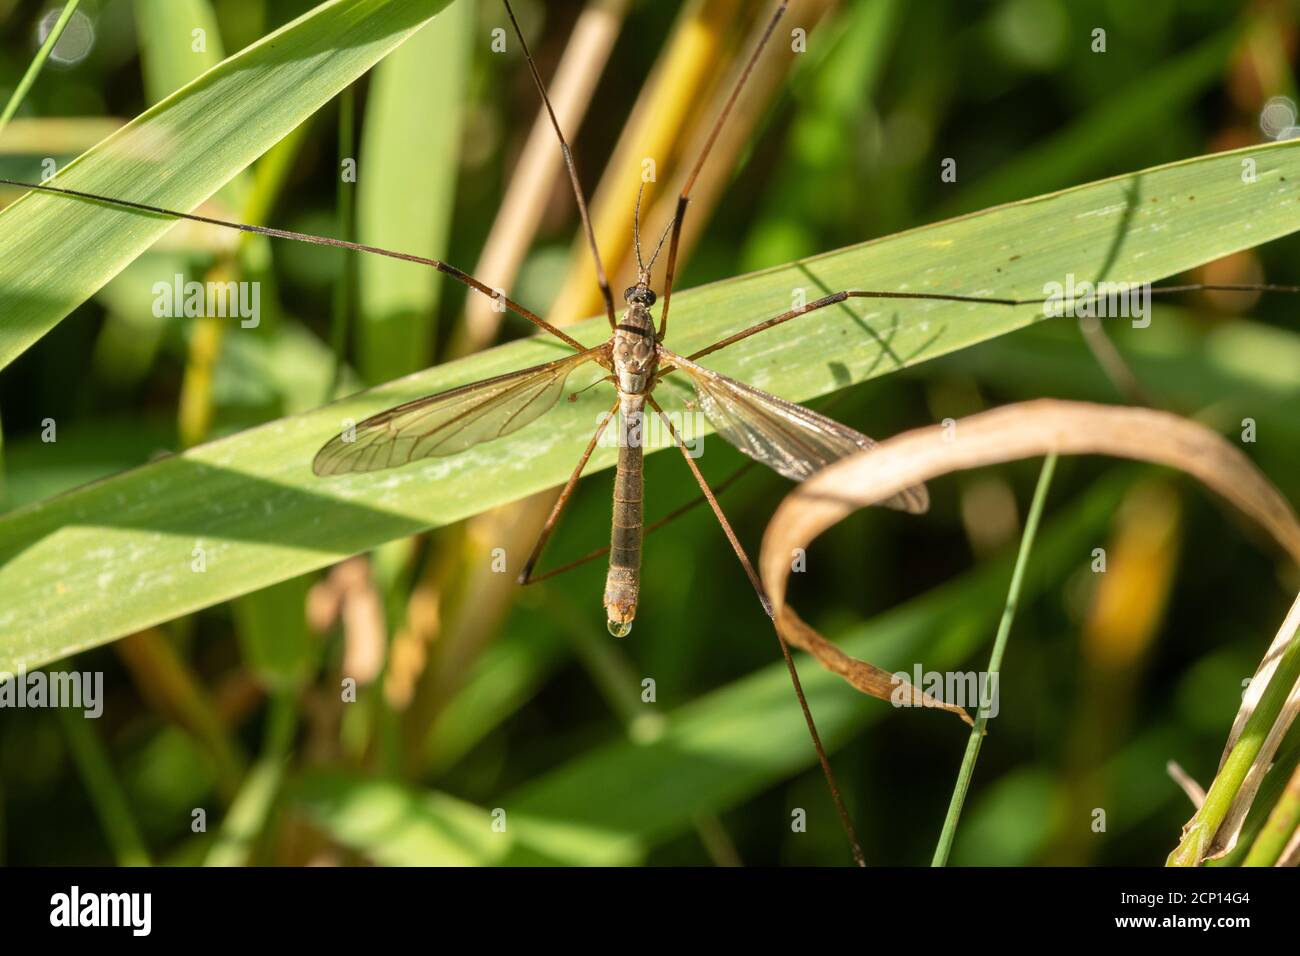 Crane fly (cranefly, also called daddy longlegs, an insect in the Tipulidae family of fly or diptera), UK Stock Photo